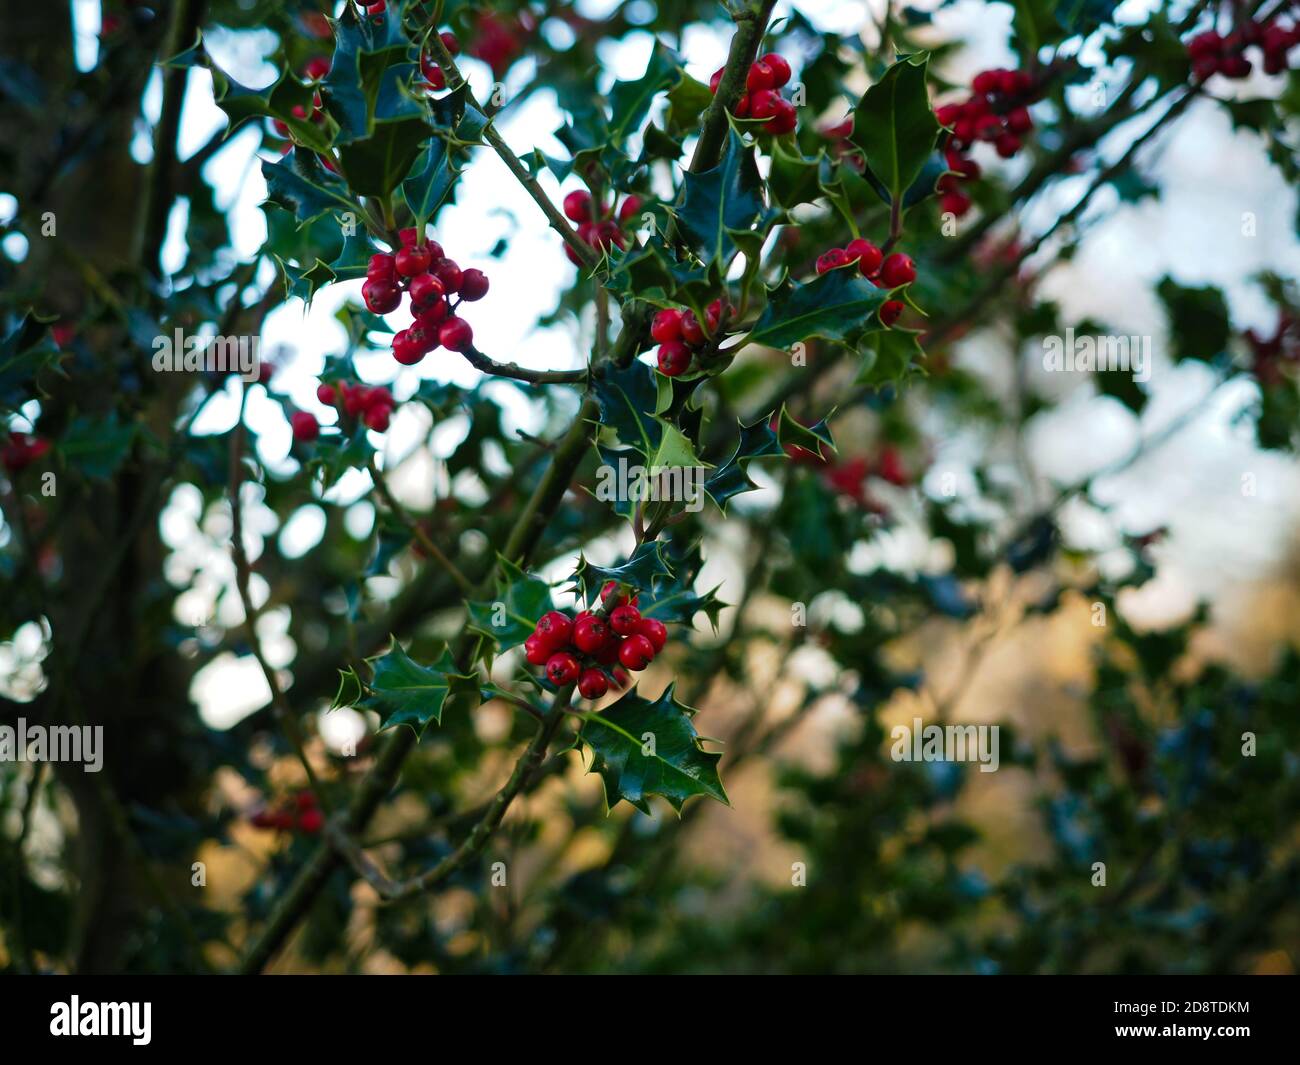 portrait of a holly plant Stock Photo